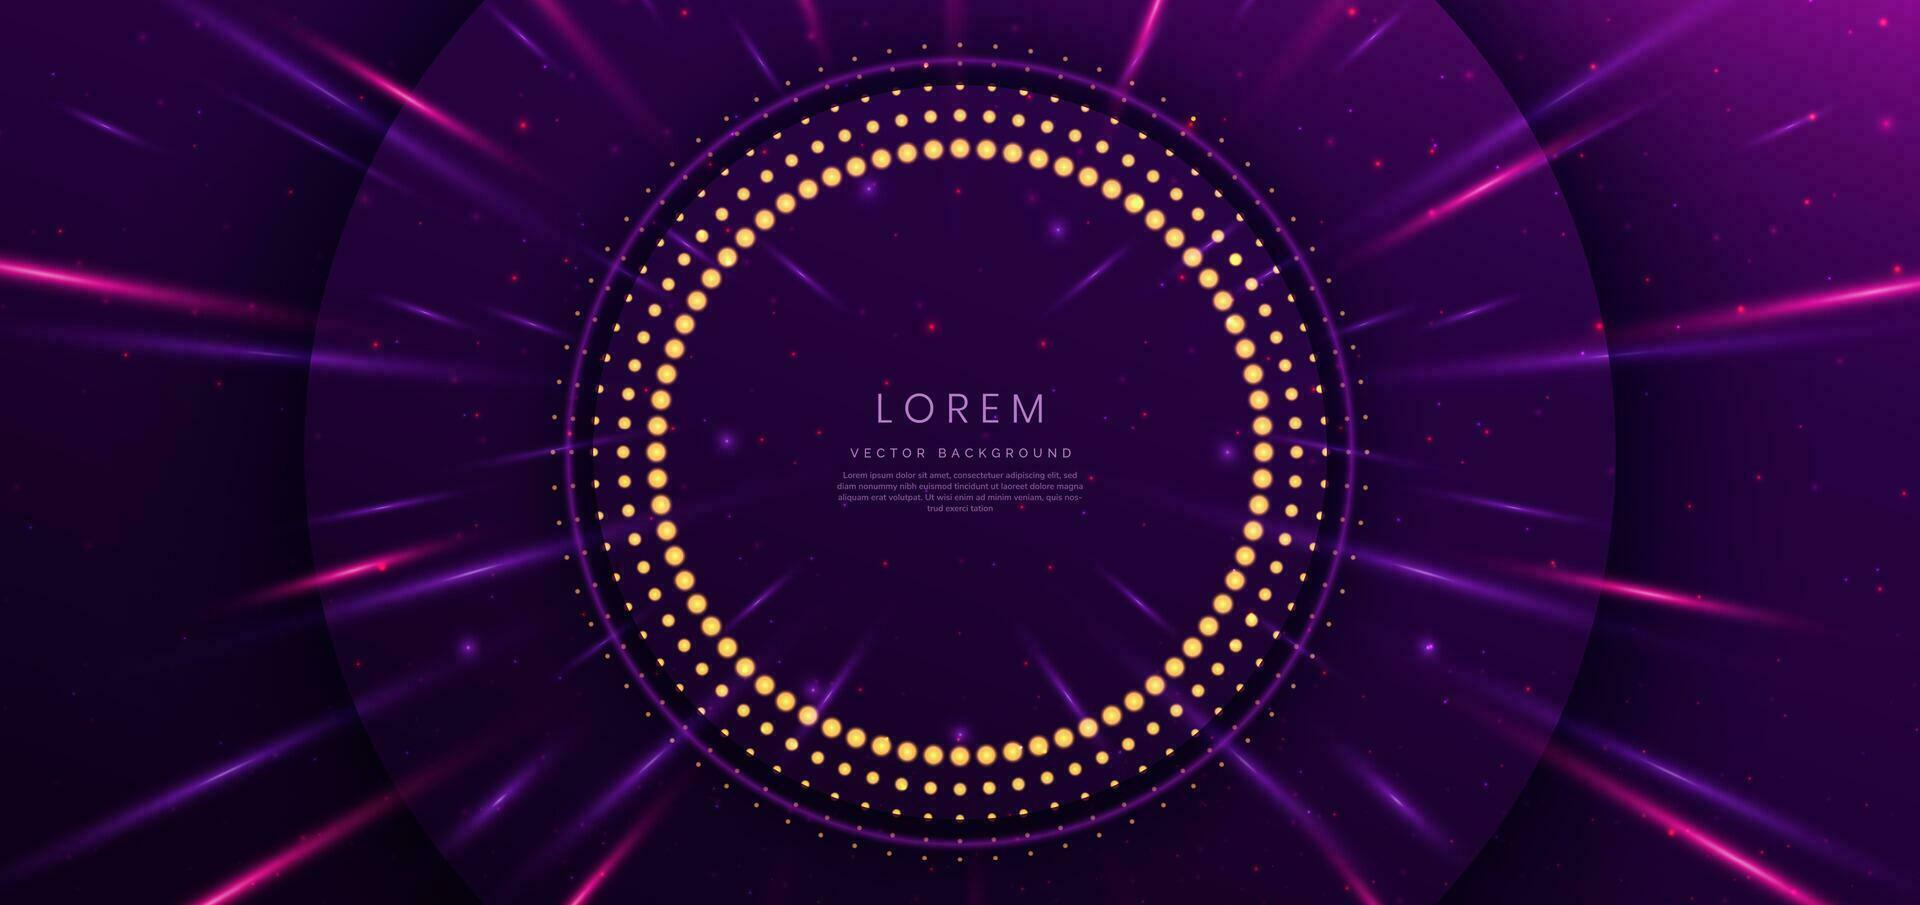 Abstract elegant purple background with circles overlapping and lighting effect sparkle. vector